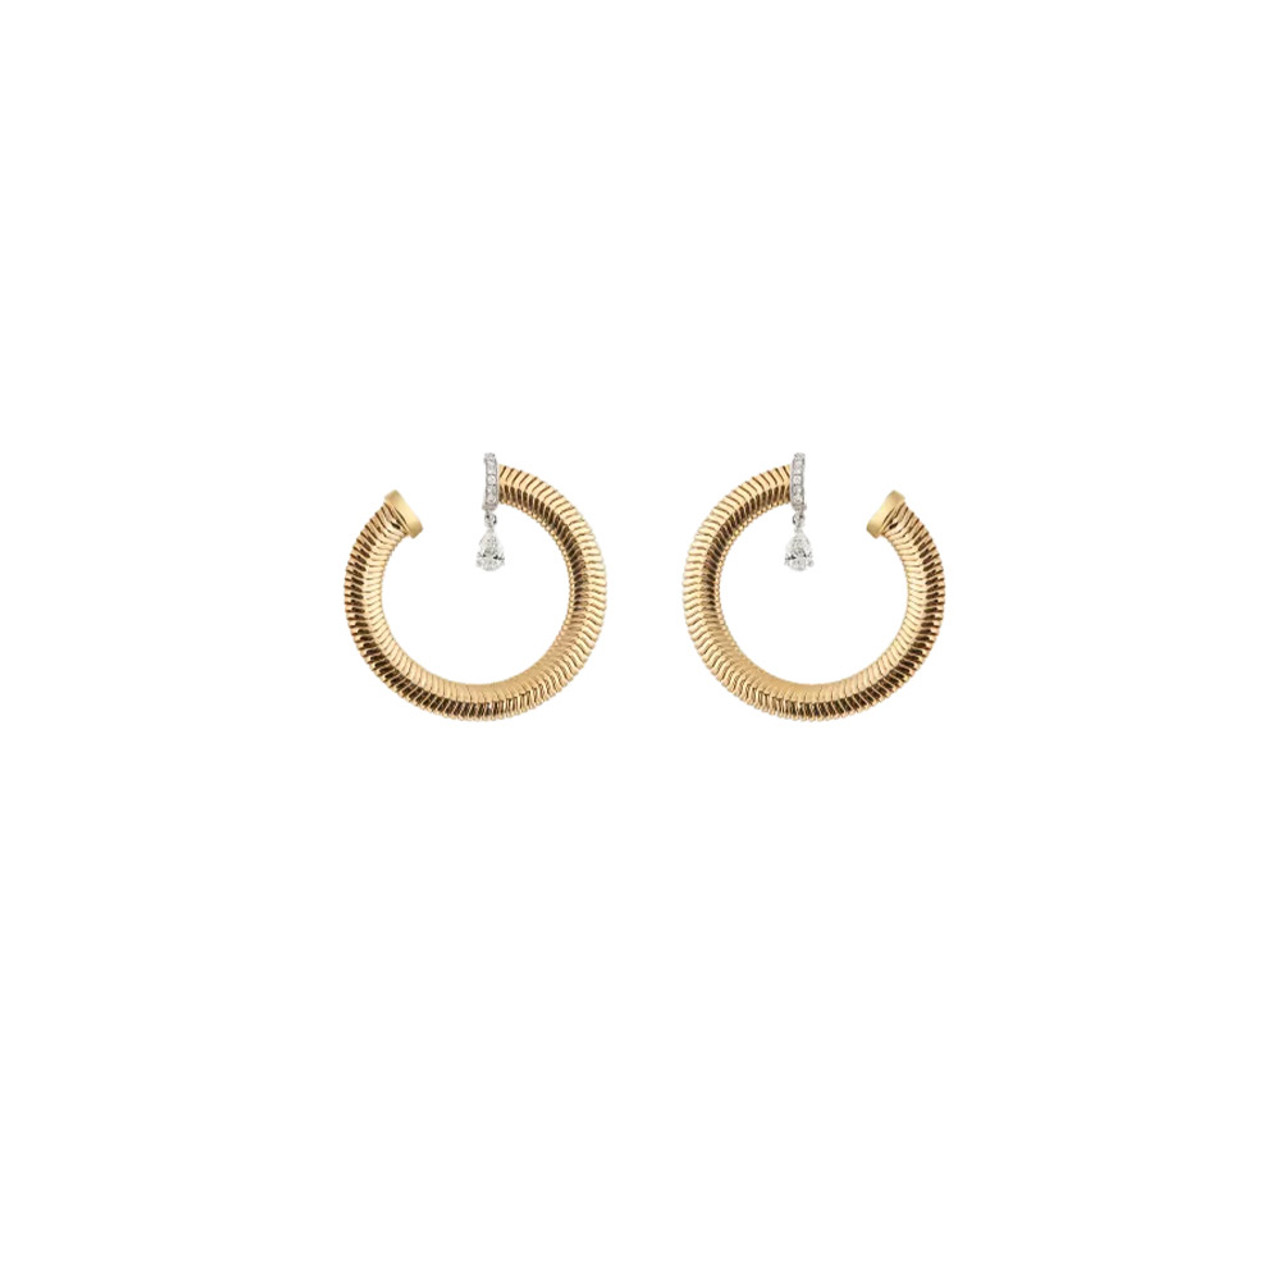 Shop Yellow Gold Diamond Pearl Stick Earrings | Carbon & Hyde